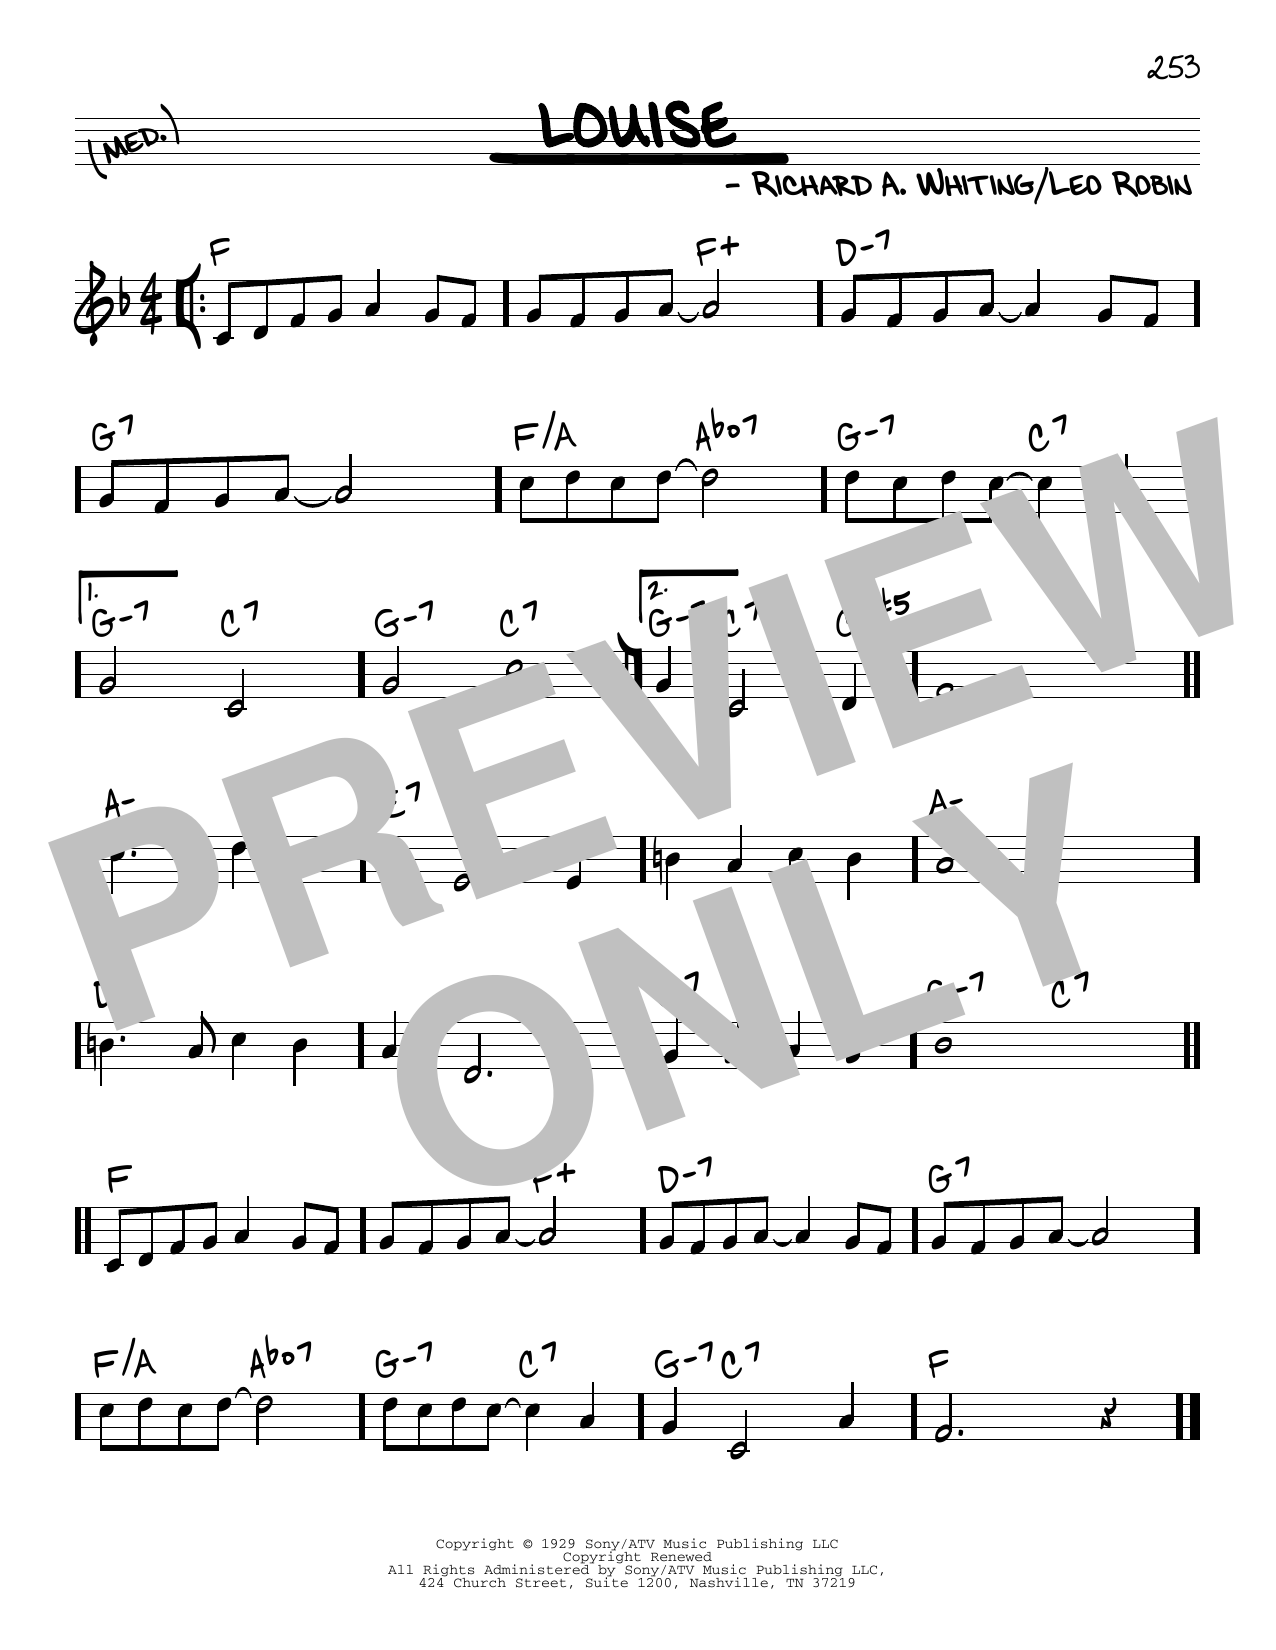 Download Leo Robin and Richard A. Whiting Louise Sheet Music